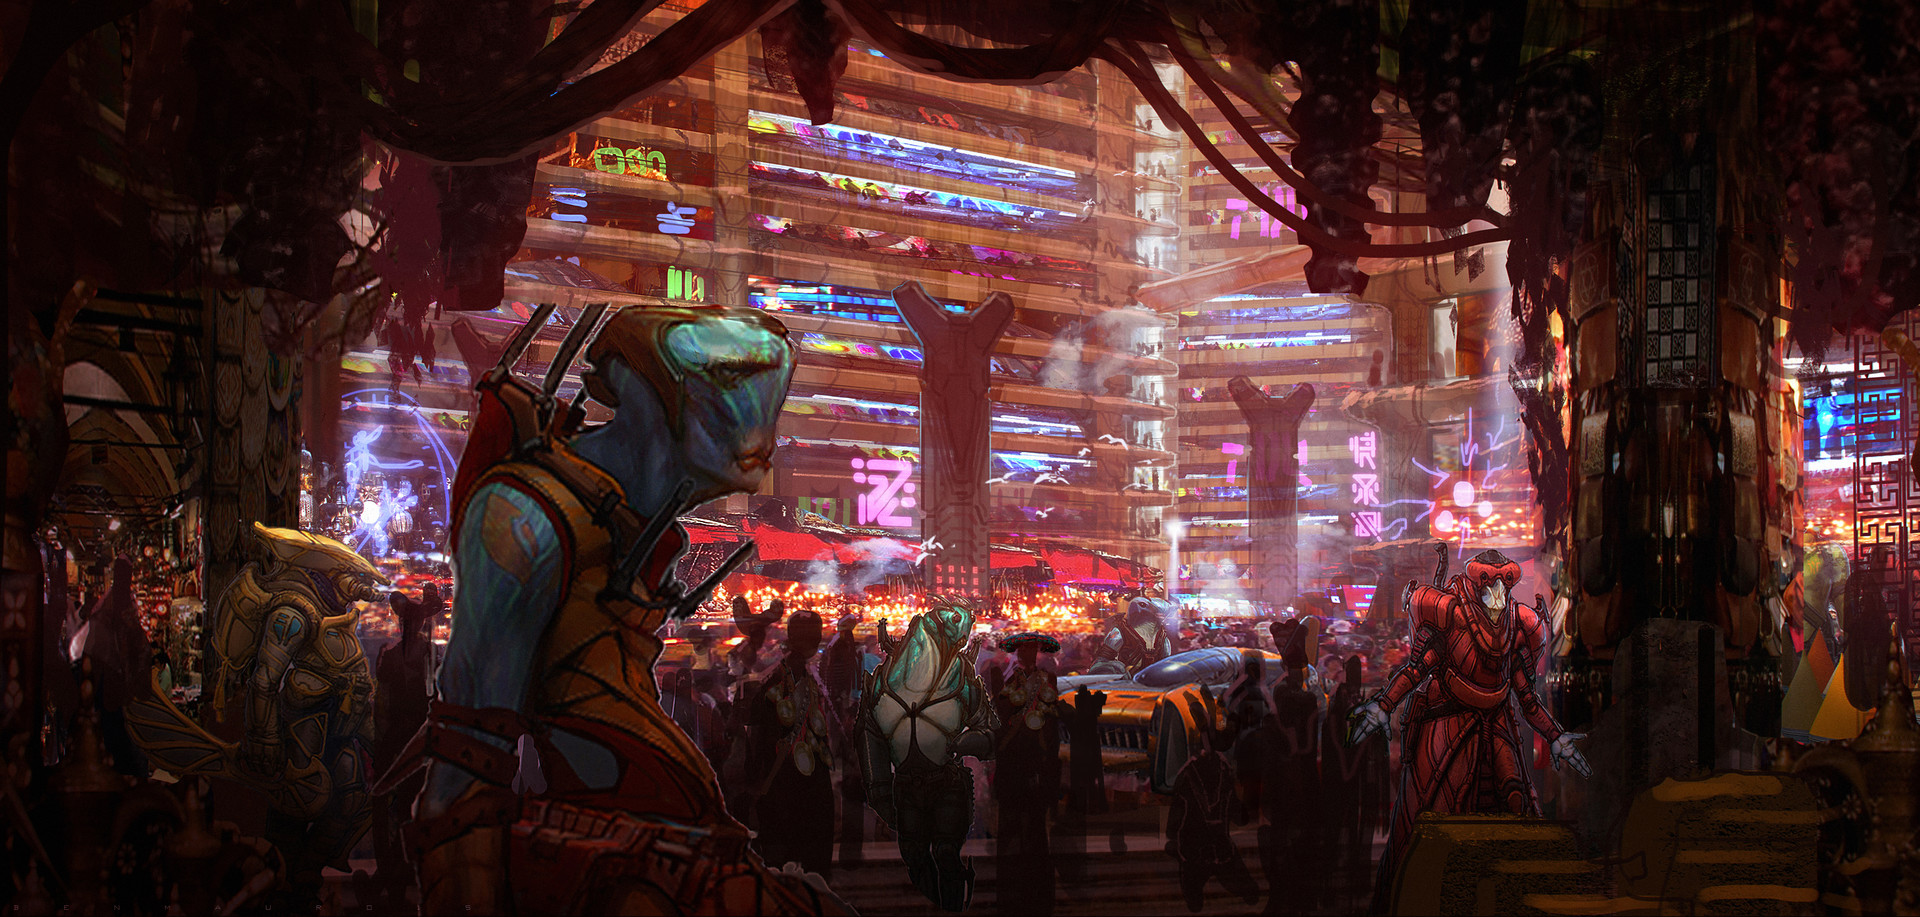 General 1920x917 Valerian and the City of a Thousand Planets Big Market aliens crowds Ben Mauro science fiction movies futuristic futuristic city artwork